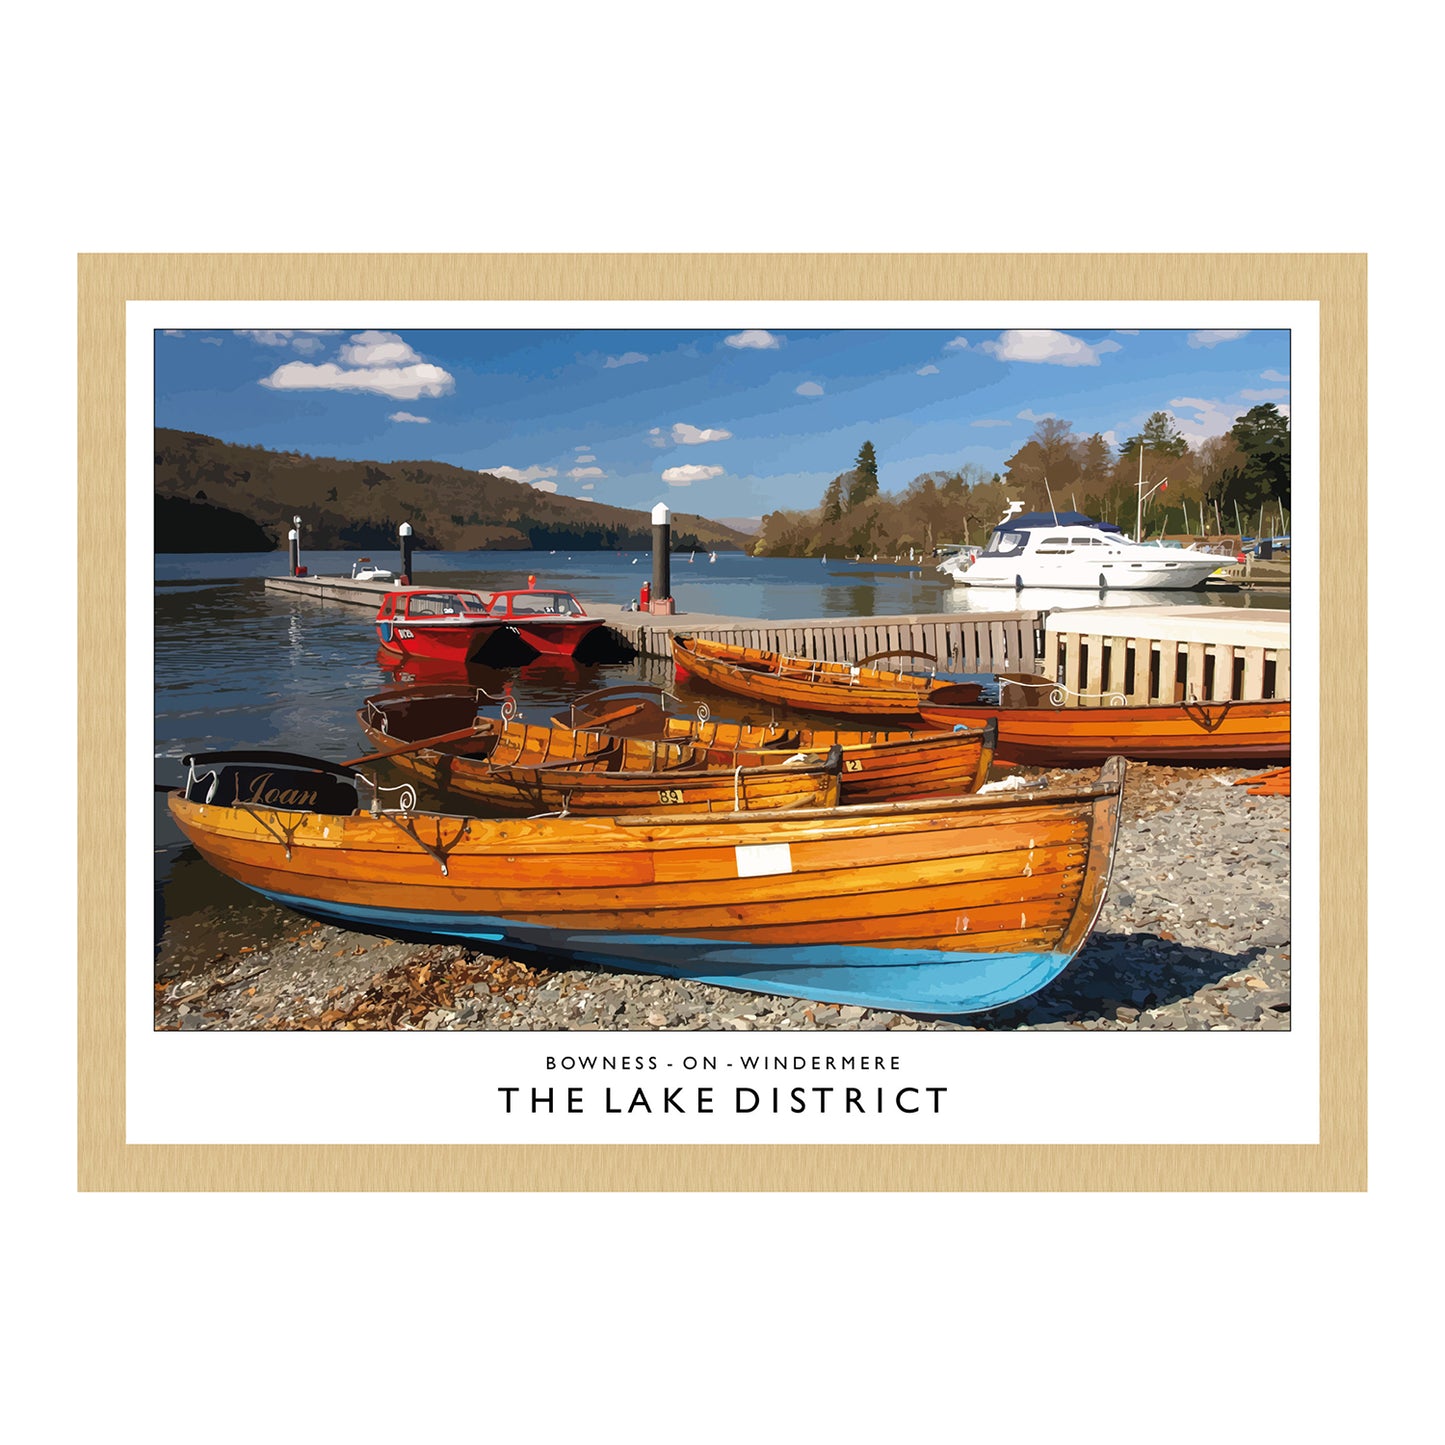 Love the Lakes Bowness-on-Windermere A3 Poster